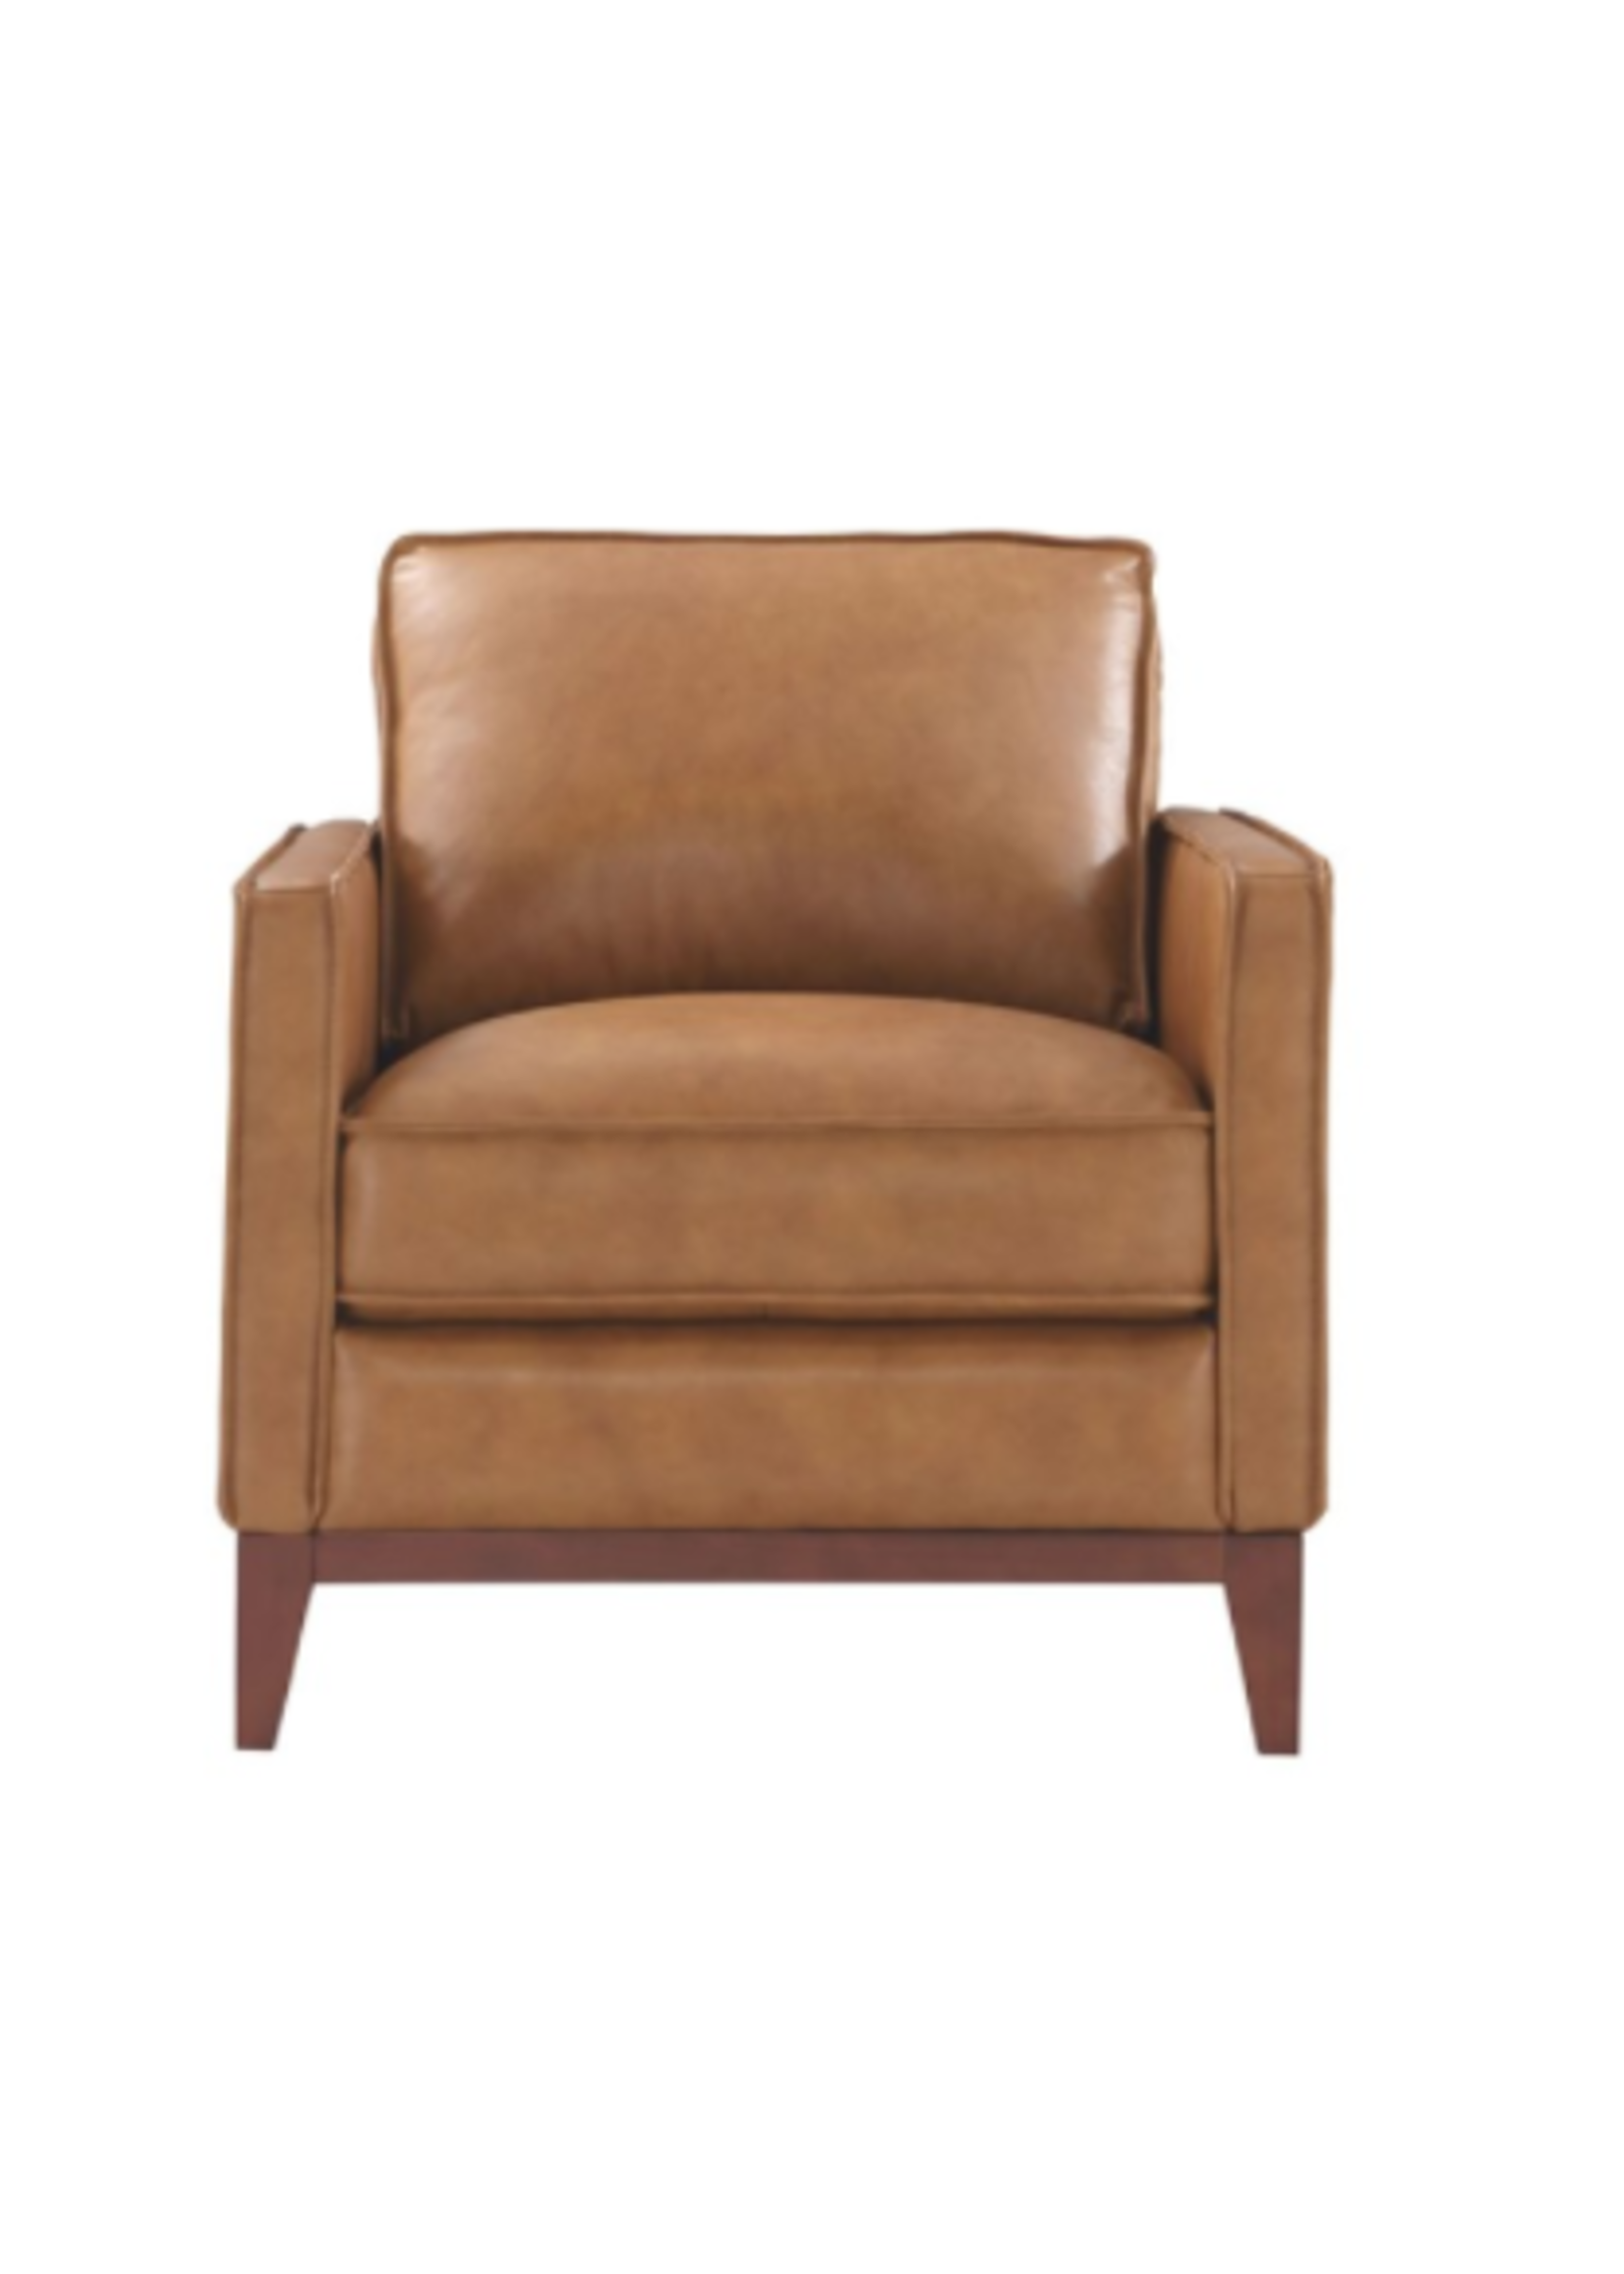 Newport Leather Chair